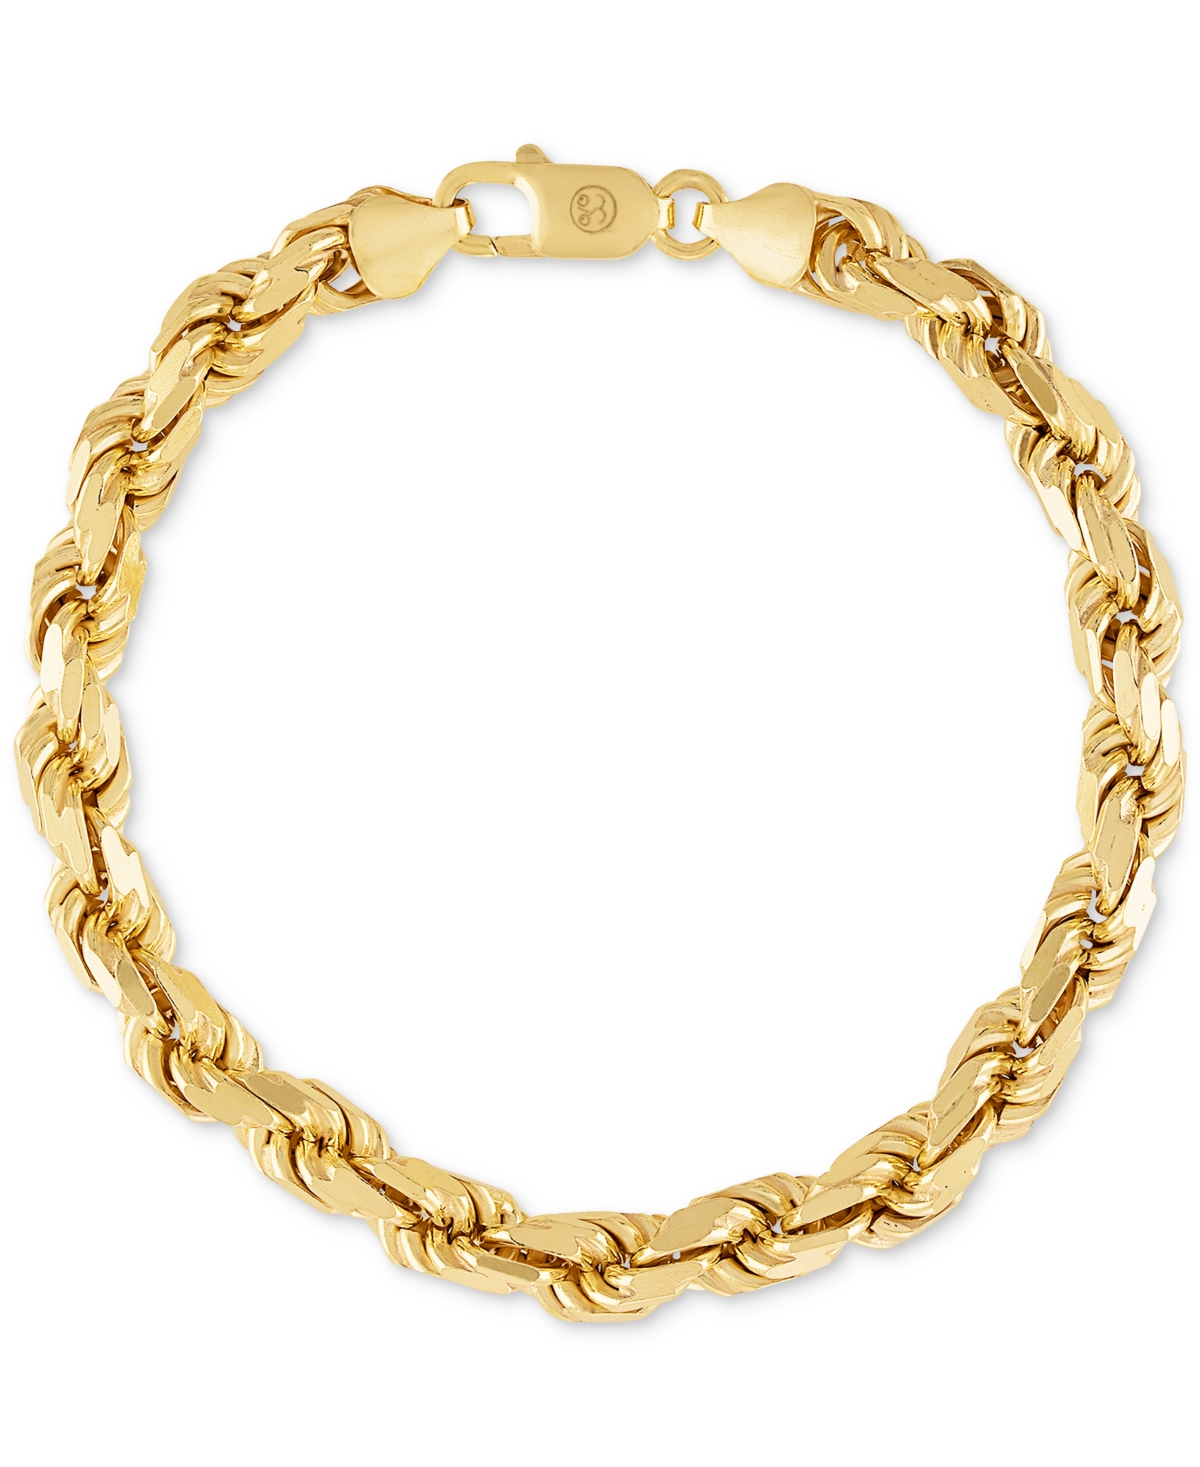 Rope Link Chain Bracelet (7.5mm), Created for Macy's - Gold Over Silver